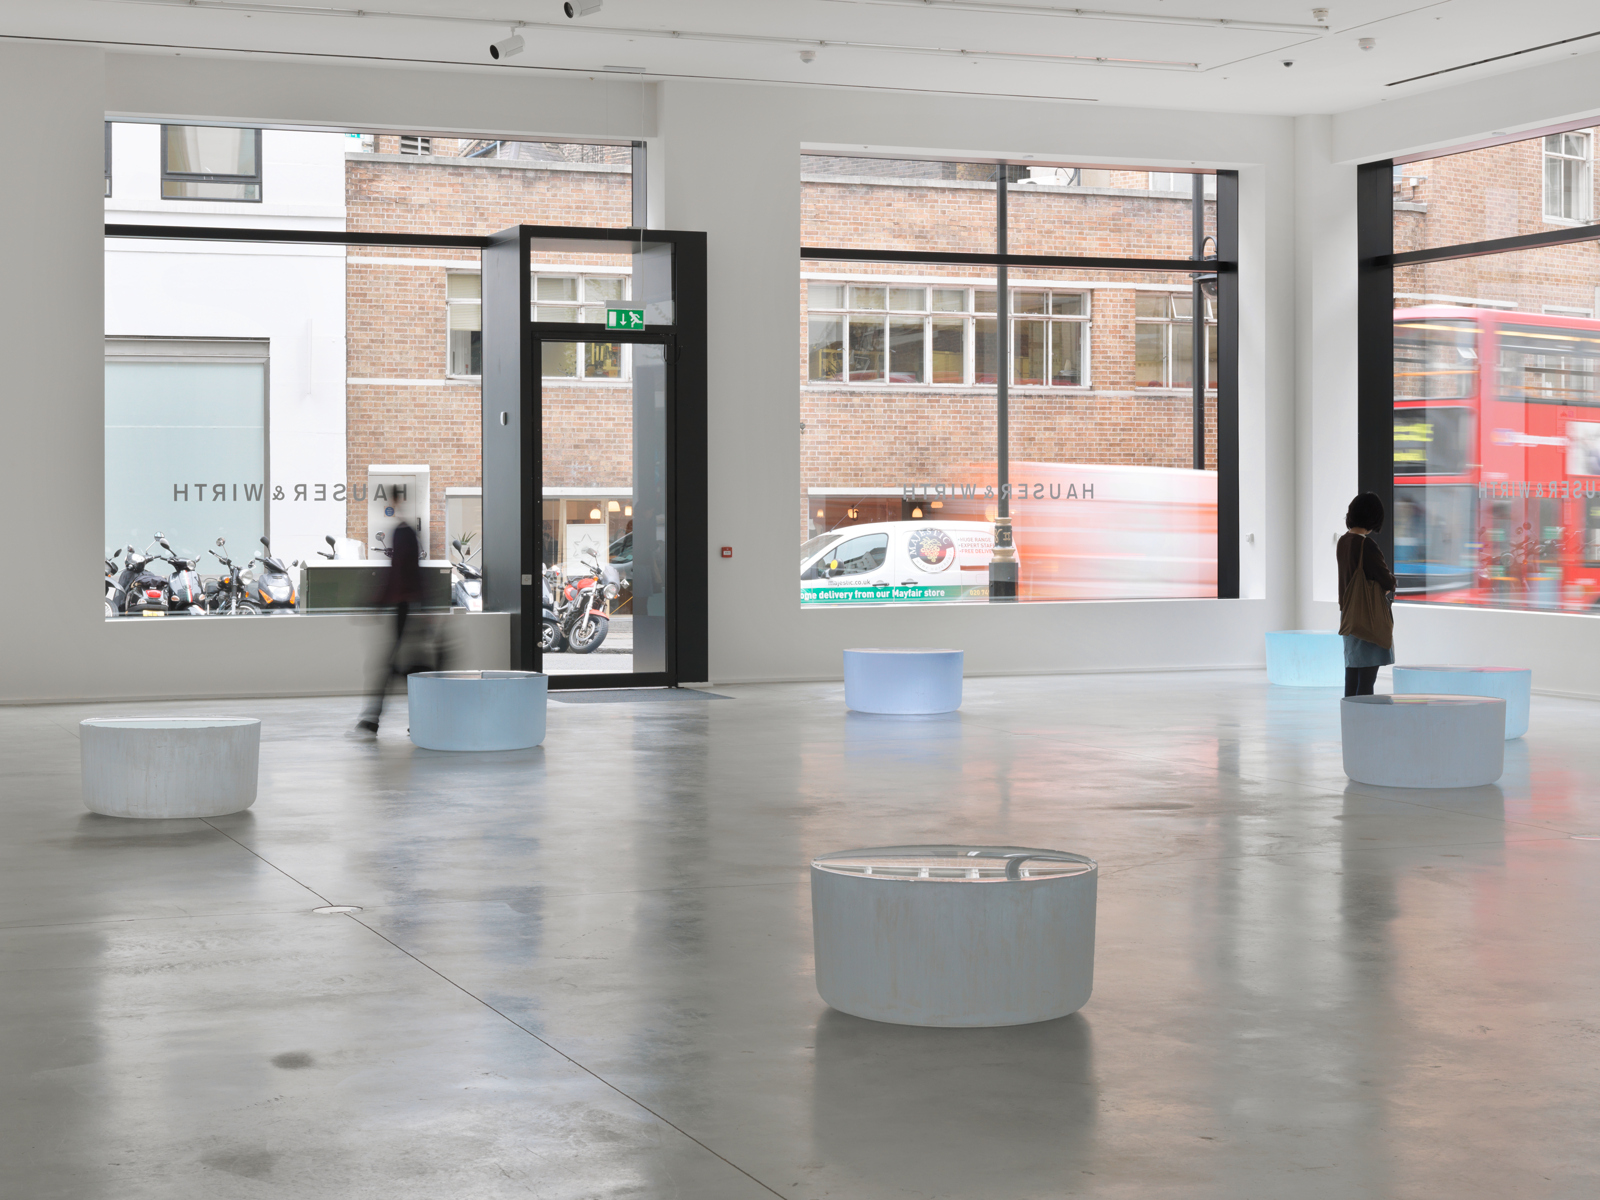 Roni Horn / "Well and Truly", installation view, "Recent Work", Hauser & Wirth, London, 2011 / 2009-2010